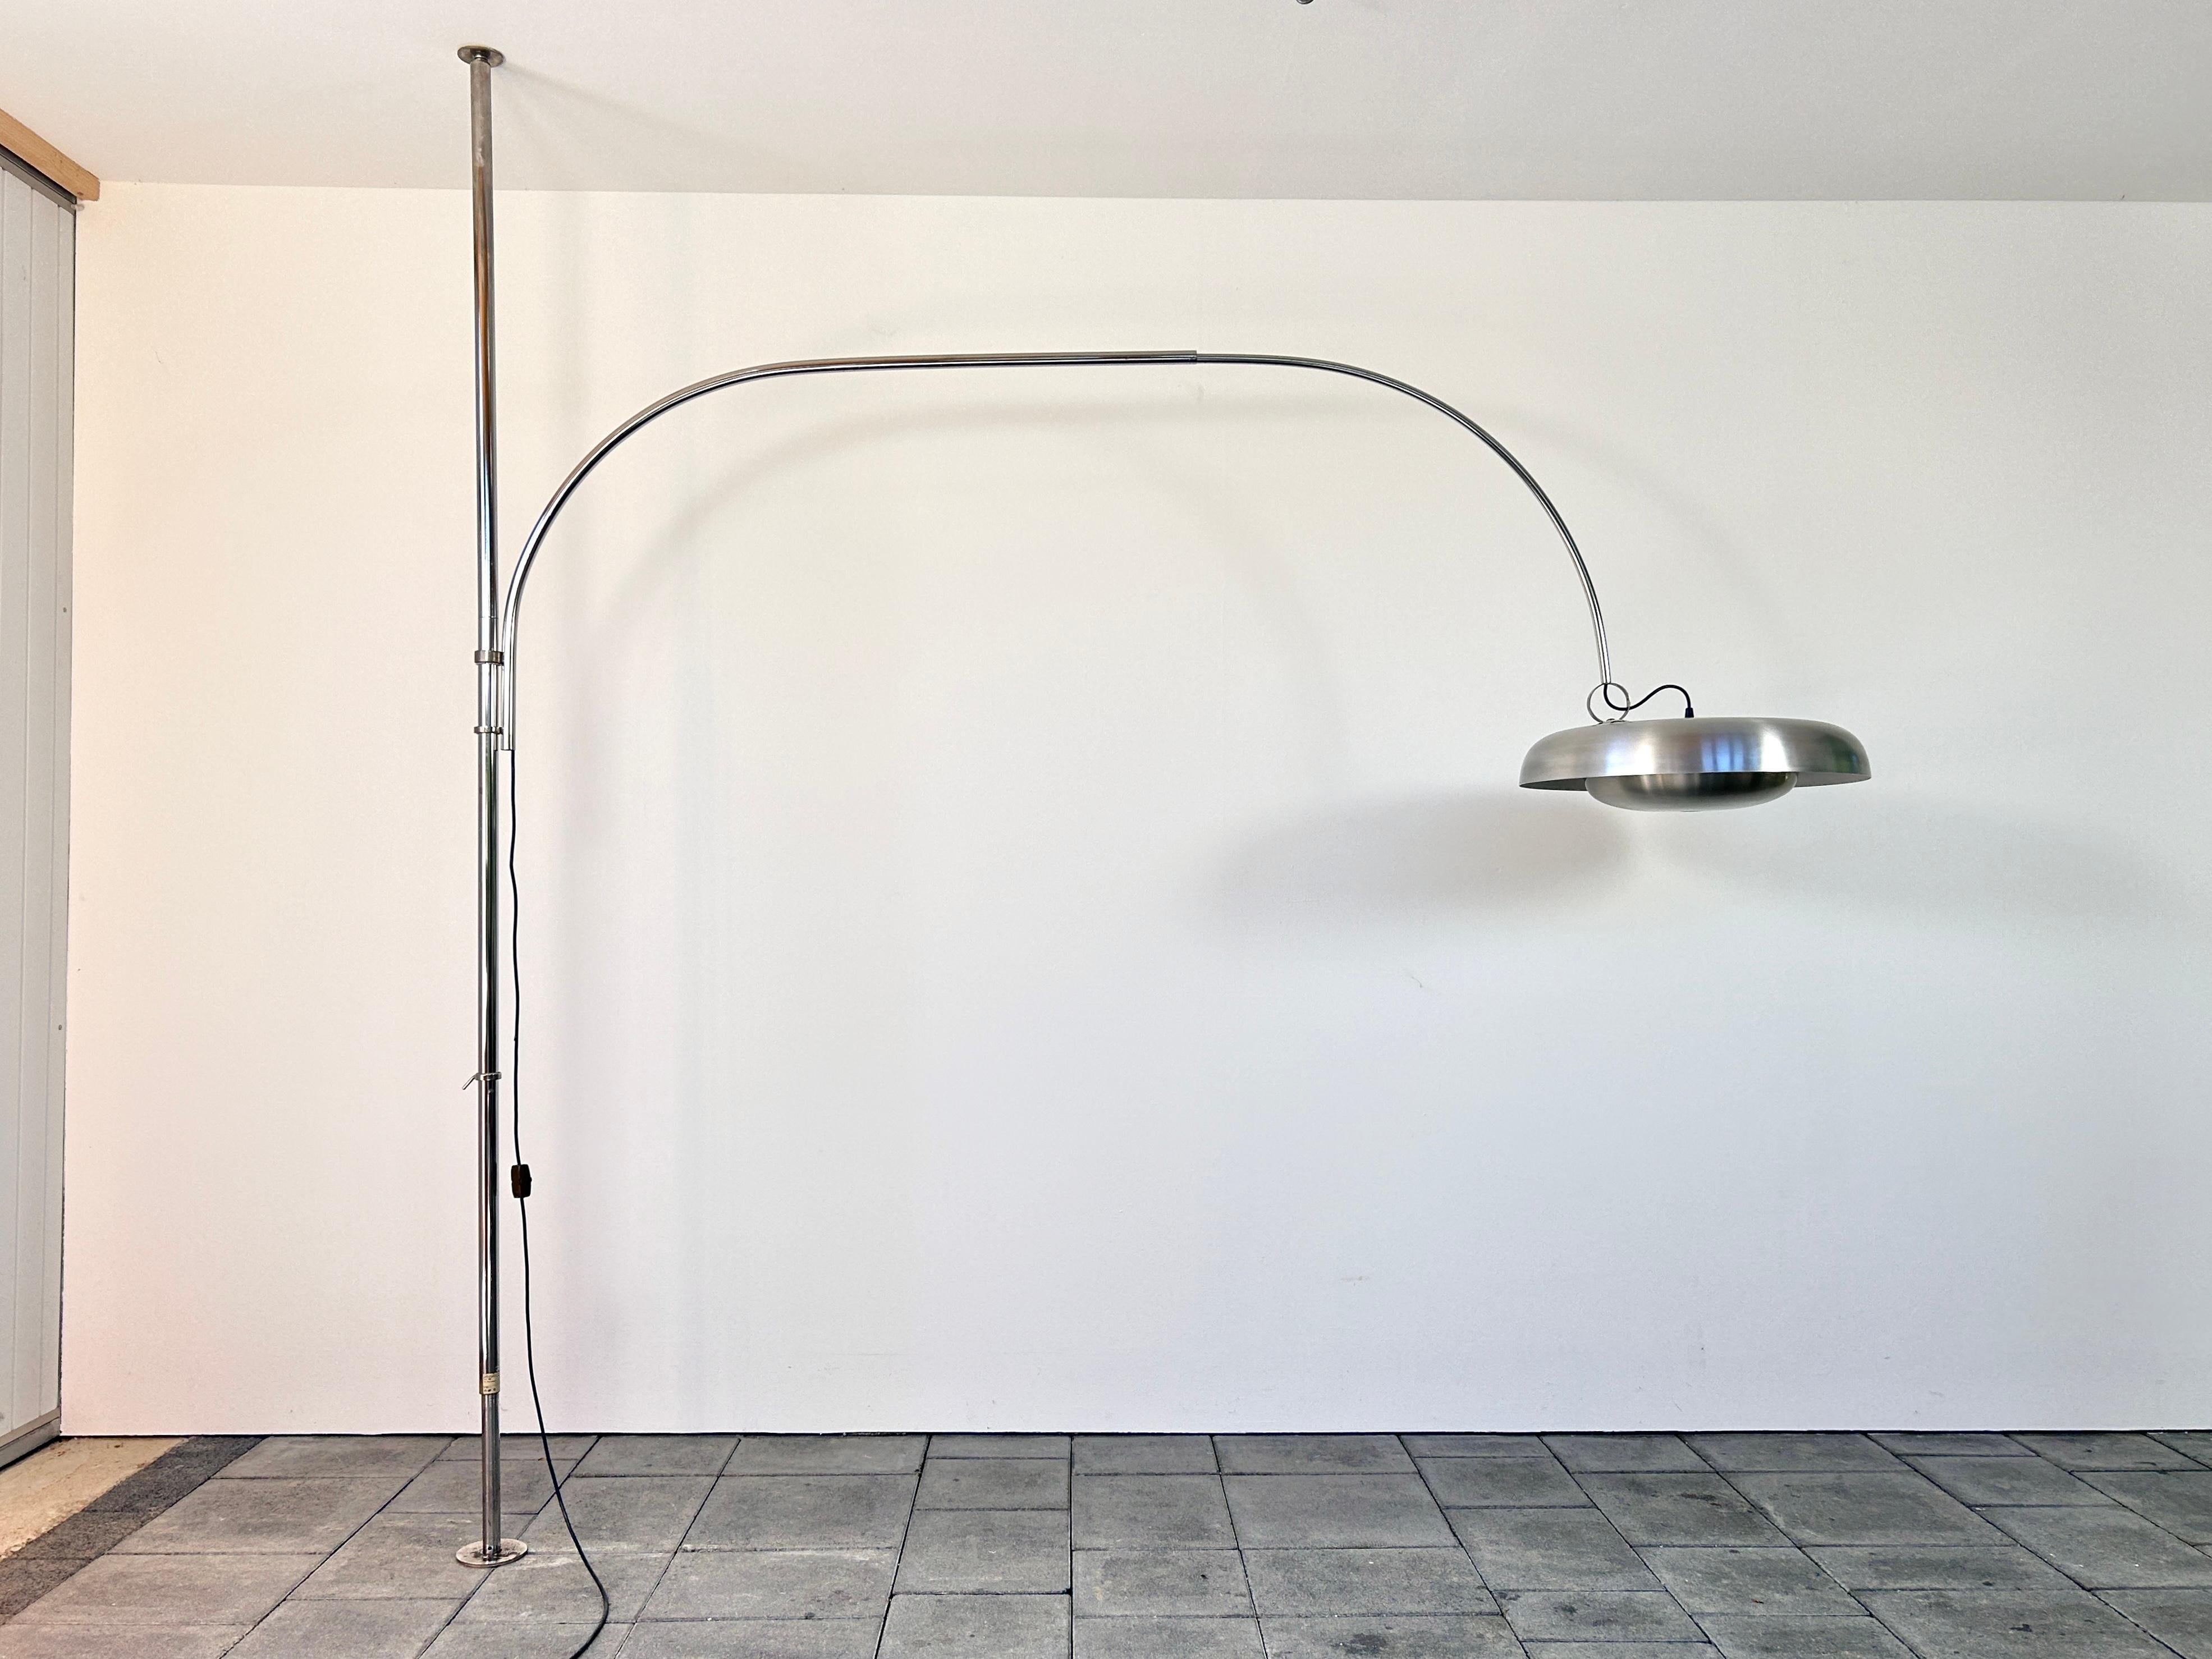 Late 20th Century PR Arc Lamp designed by Pirro Cuniberti for Sirrah Imola, Italy 1970 